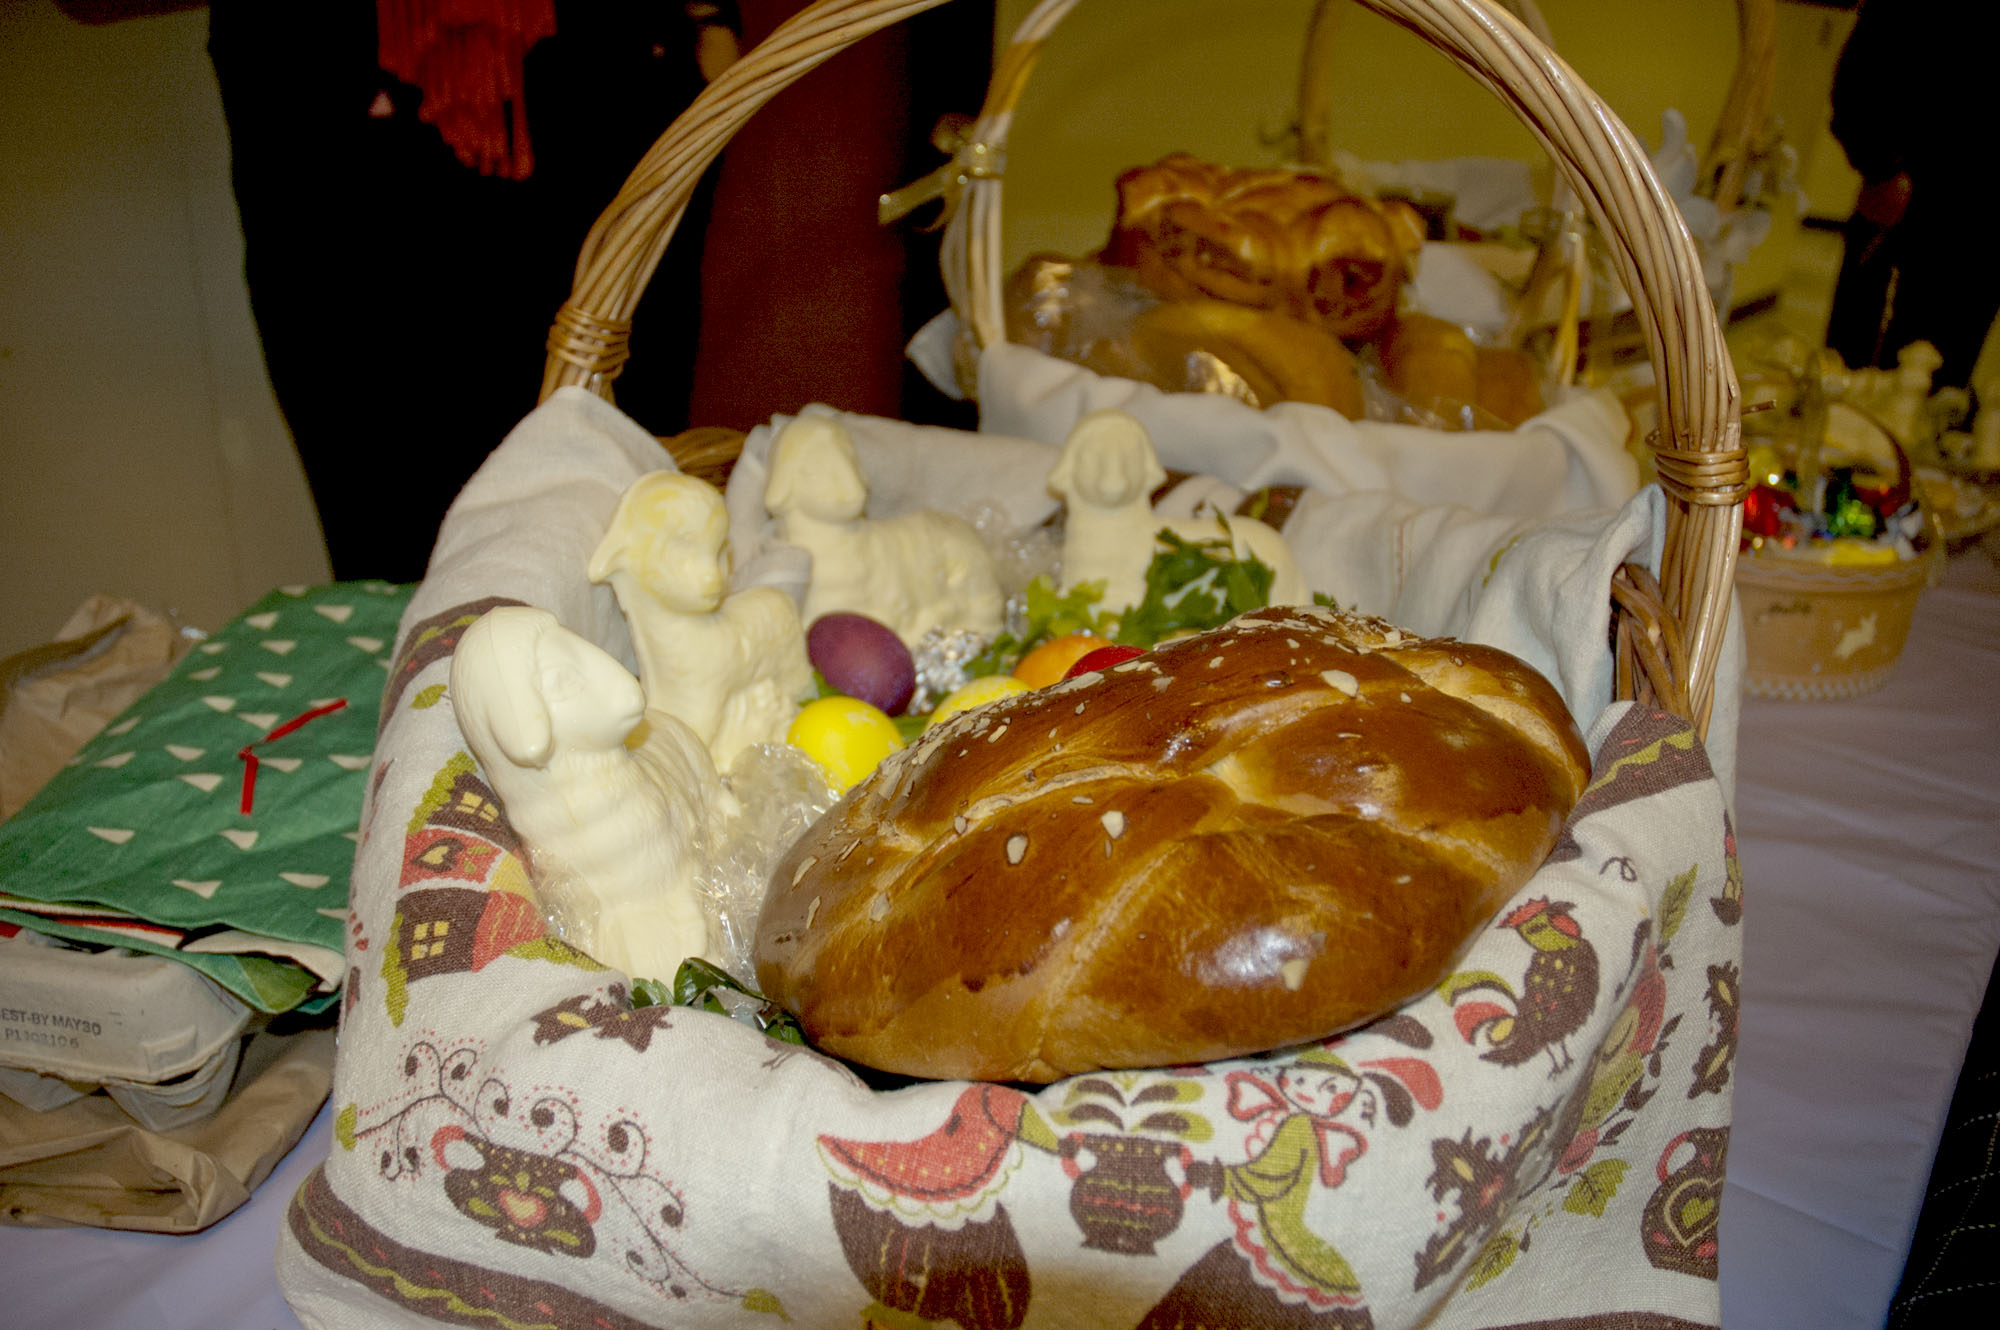 Basket of butter lambs and Easter bread.